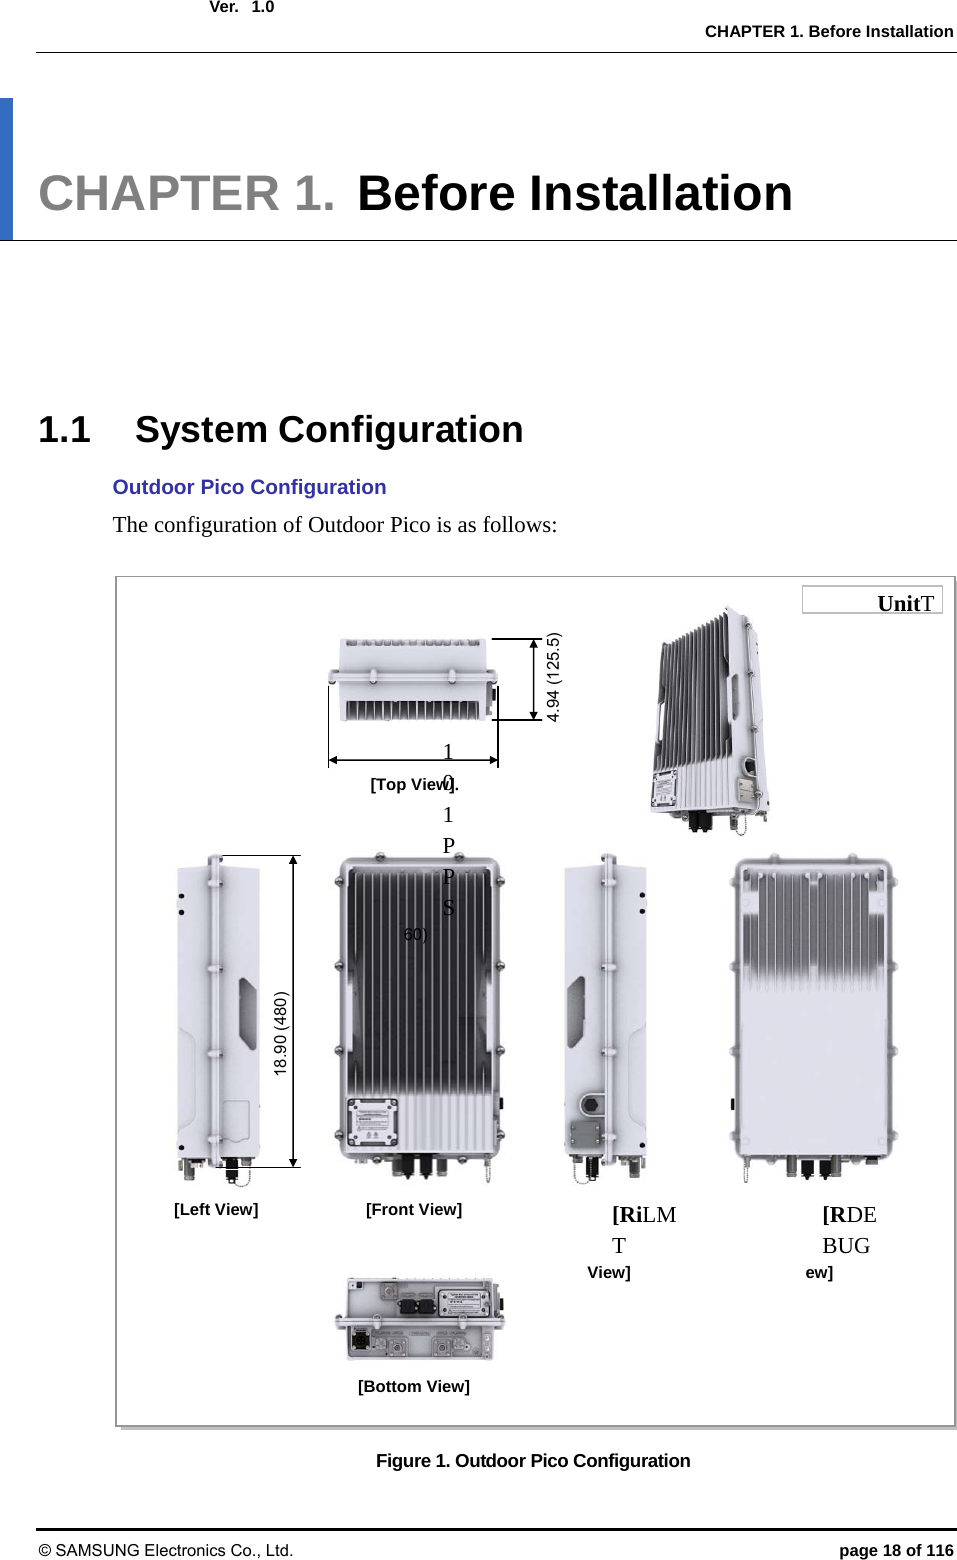  Ver.   CHAPTER 1. Before Installation © SAMSUNG Electronics Co., Ltd.  page 18 of 116 1.0CHAPTER 1. Before Installation      1.1 System Configuration Outdoor Pico Configuration The configuration of Outdoor Pico is as follows:  Figure 1. Outdoor Pico Configuration UnitT10.1PPS60) [Bottom View]18.90 (480) [Front View] [Top View] [Left View] [RiLMT View] [RDEBUG ew] 4.94 (125.5) 